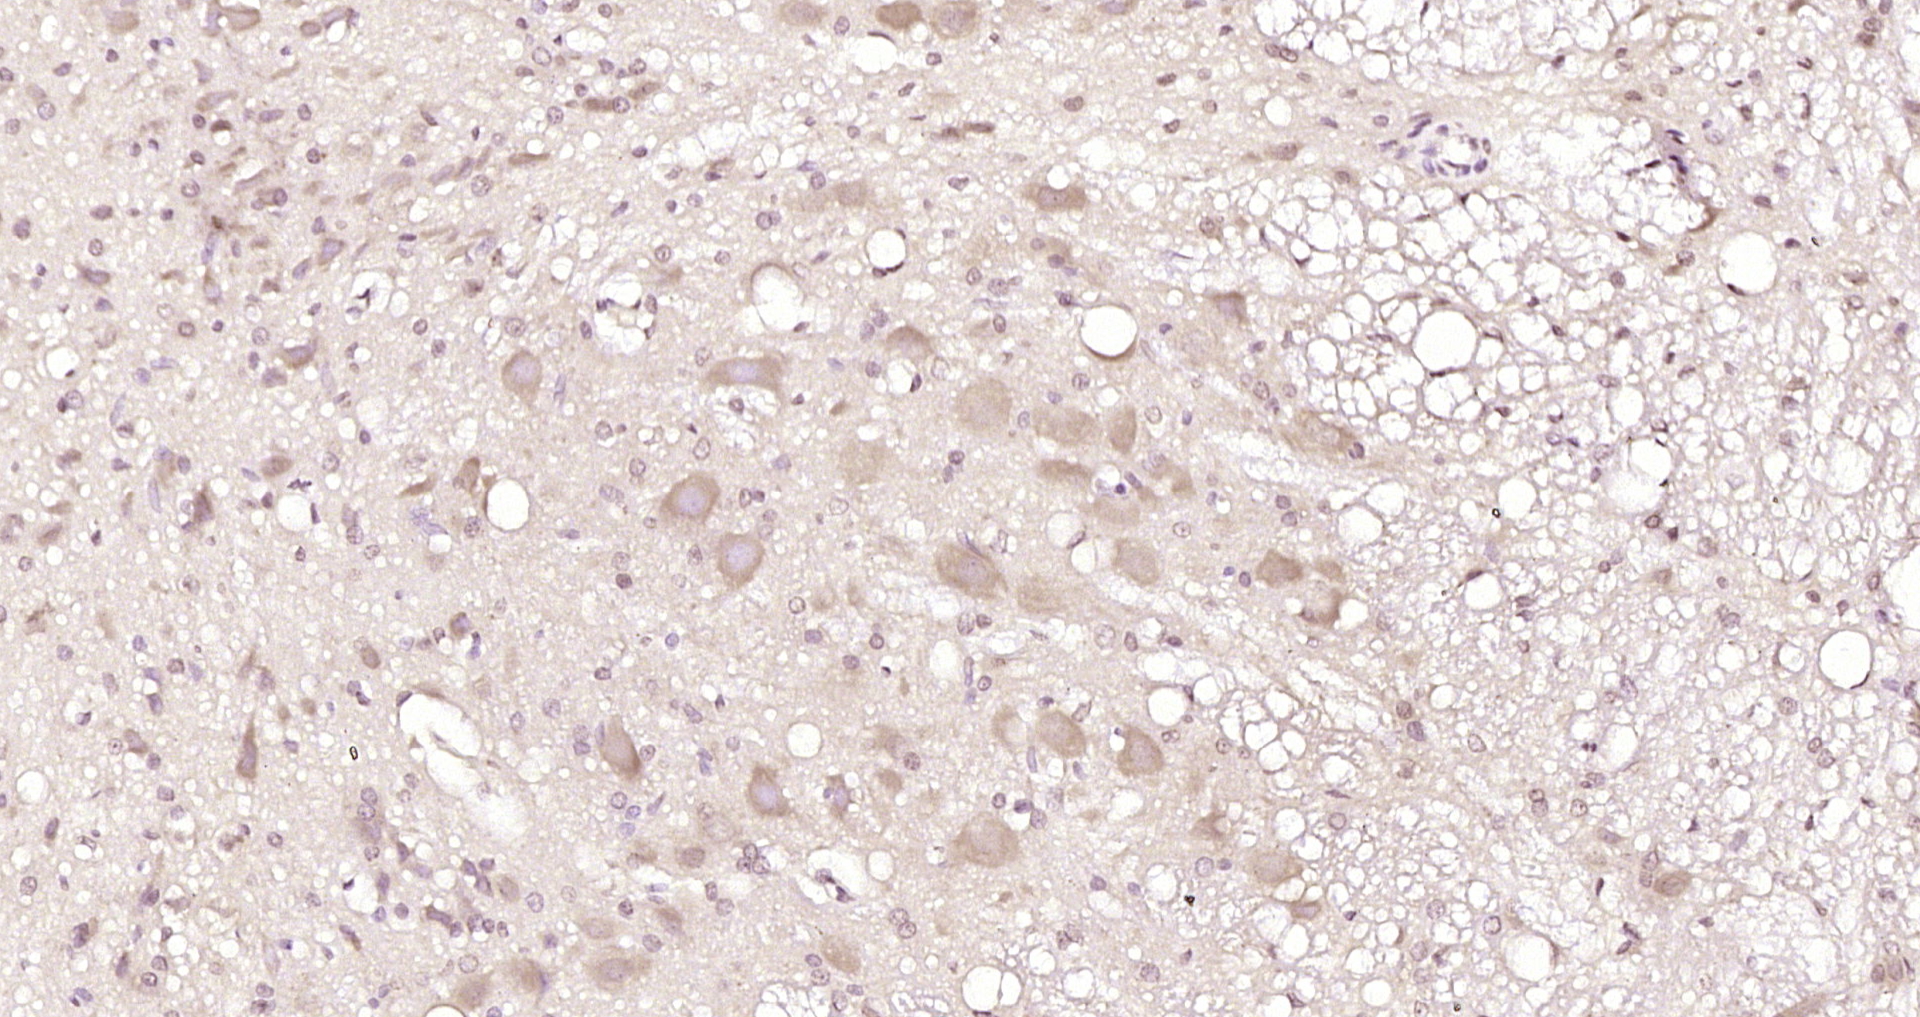 Paraformaldehyde-fixed, paraffin embedded Rat brain; Antigen retrieval by boiling in sodium citrate buffer (pH6.0) for 15min; Block endogenous peroxidase by 3% hydrogen peroxide for 20 minutes; Blocking buffer (normal goat serum) at 37°C for 30min; Antibody incubation with RPL5 Polyclonal Antibody, Unconjugated (bs-6573R) at 1:200 overnight at 4°C, DAB staining.